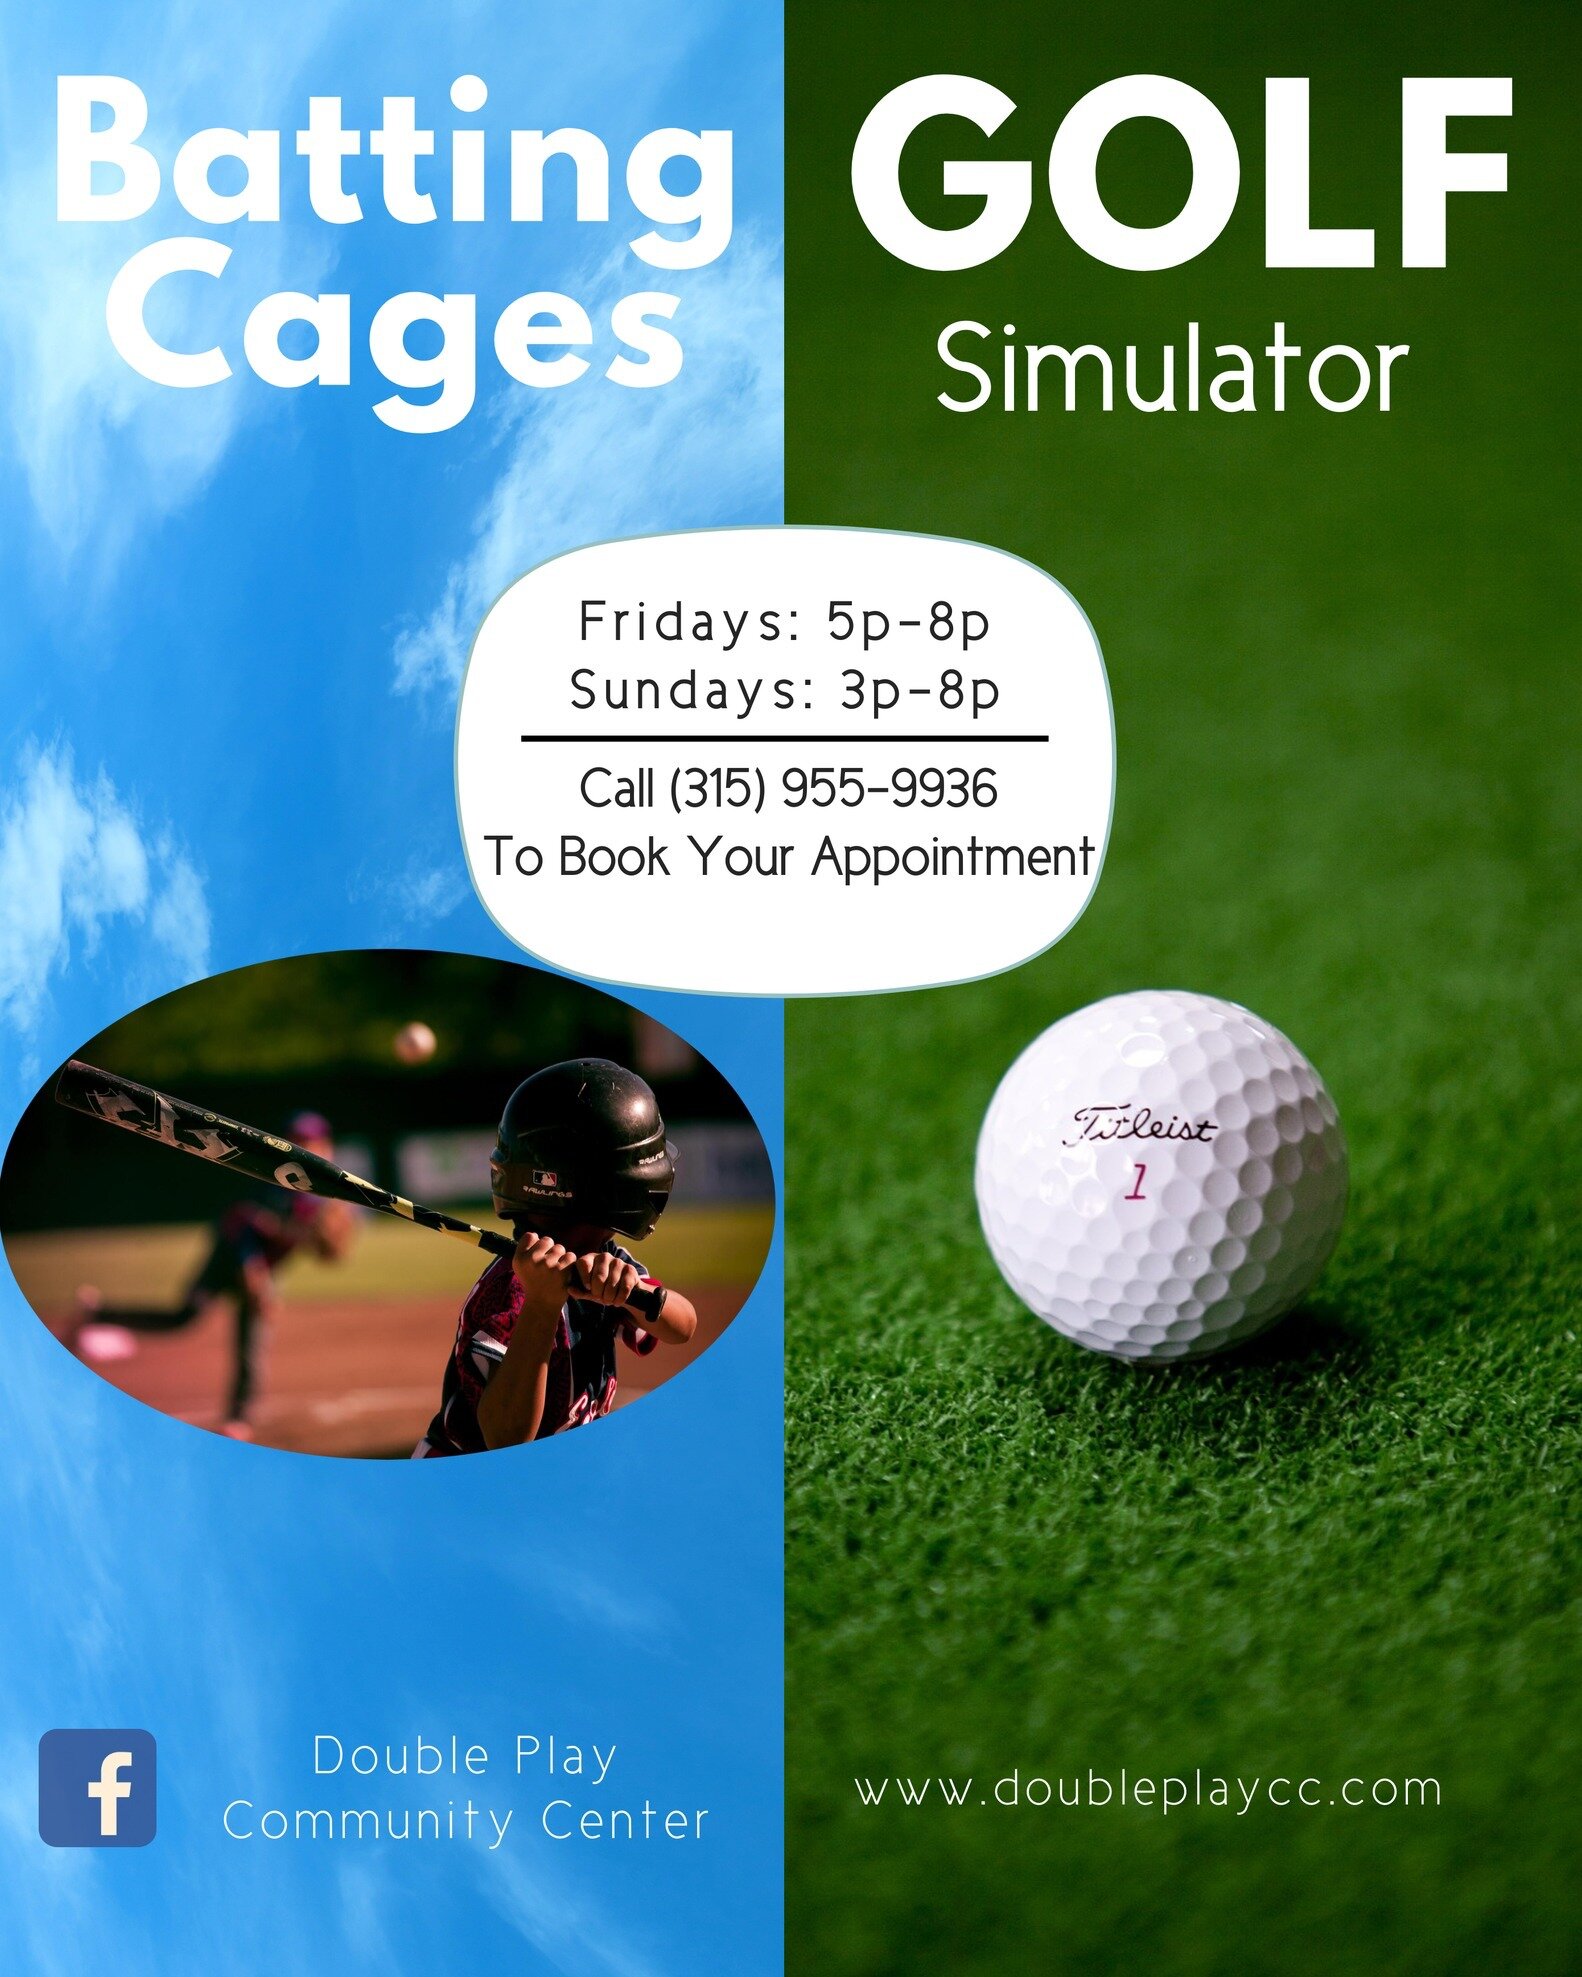 We have a 4:30pm slot open for either a batting cage or golf simulator today! 

Call (315) 376-7001 to book!